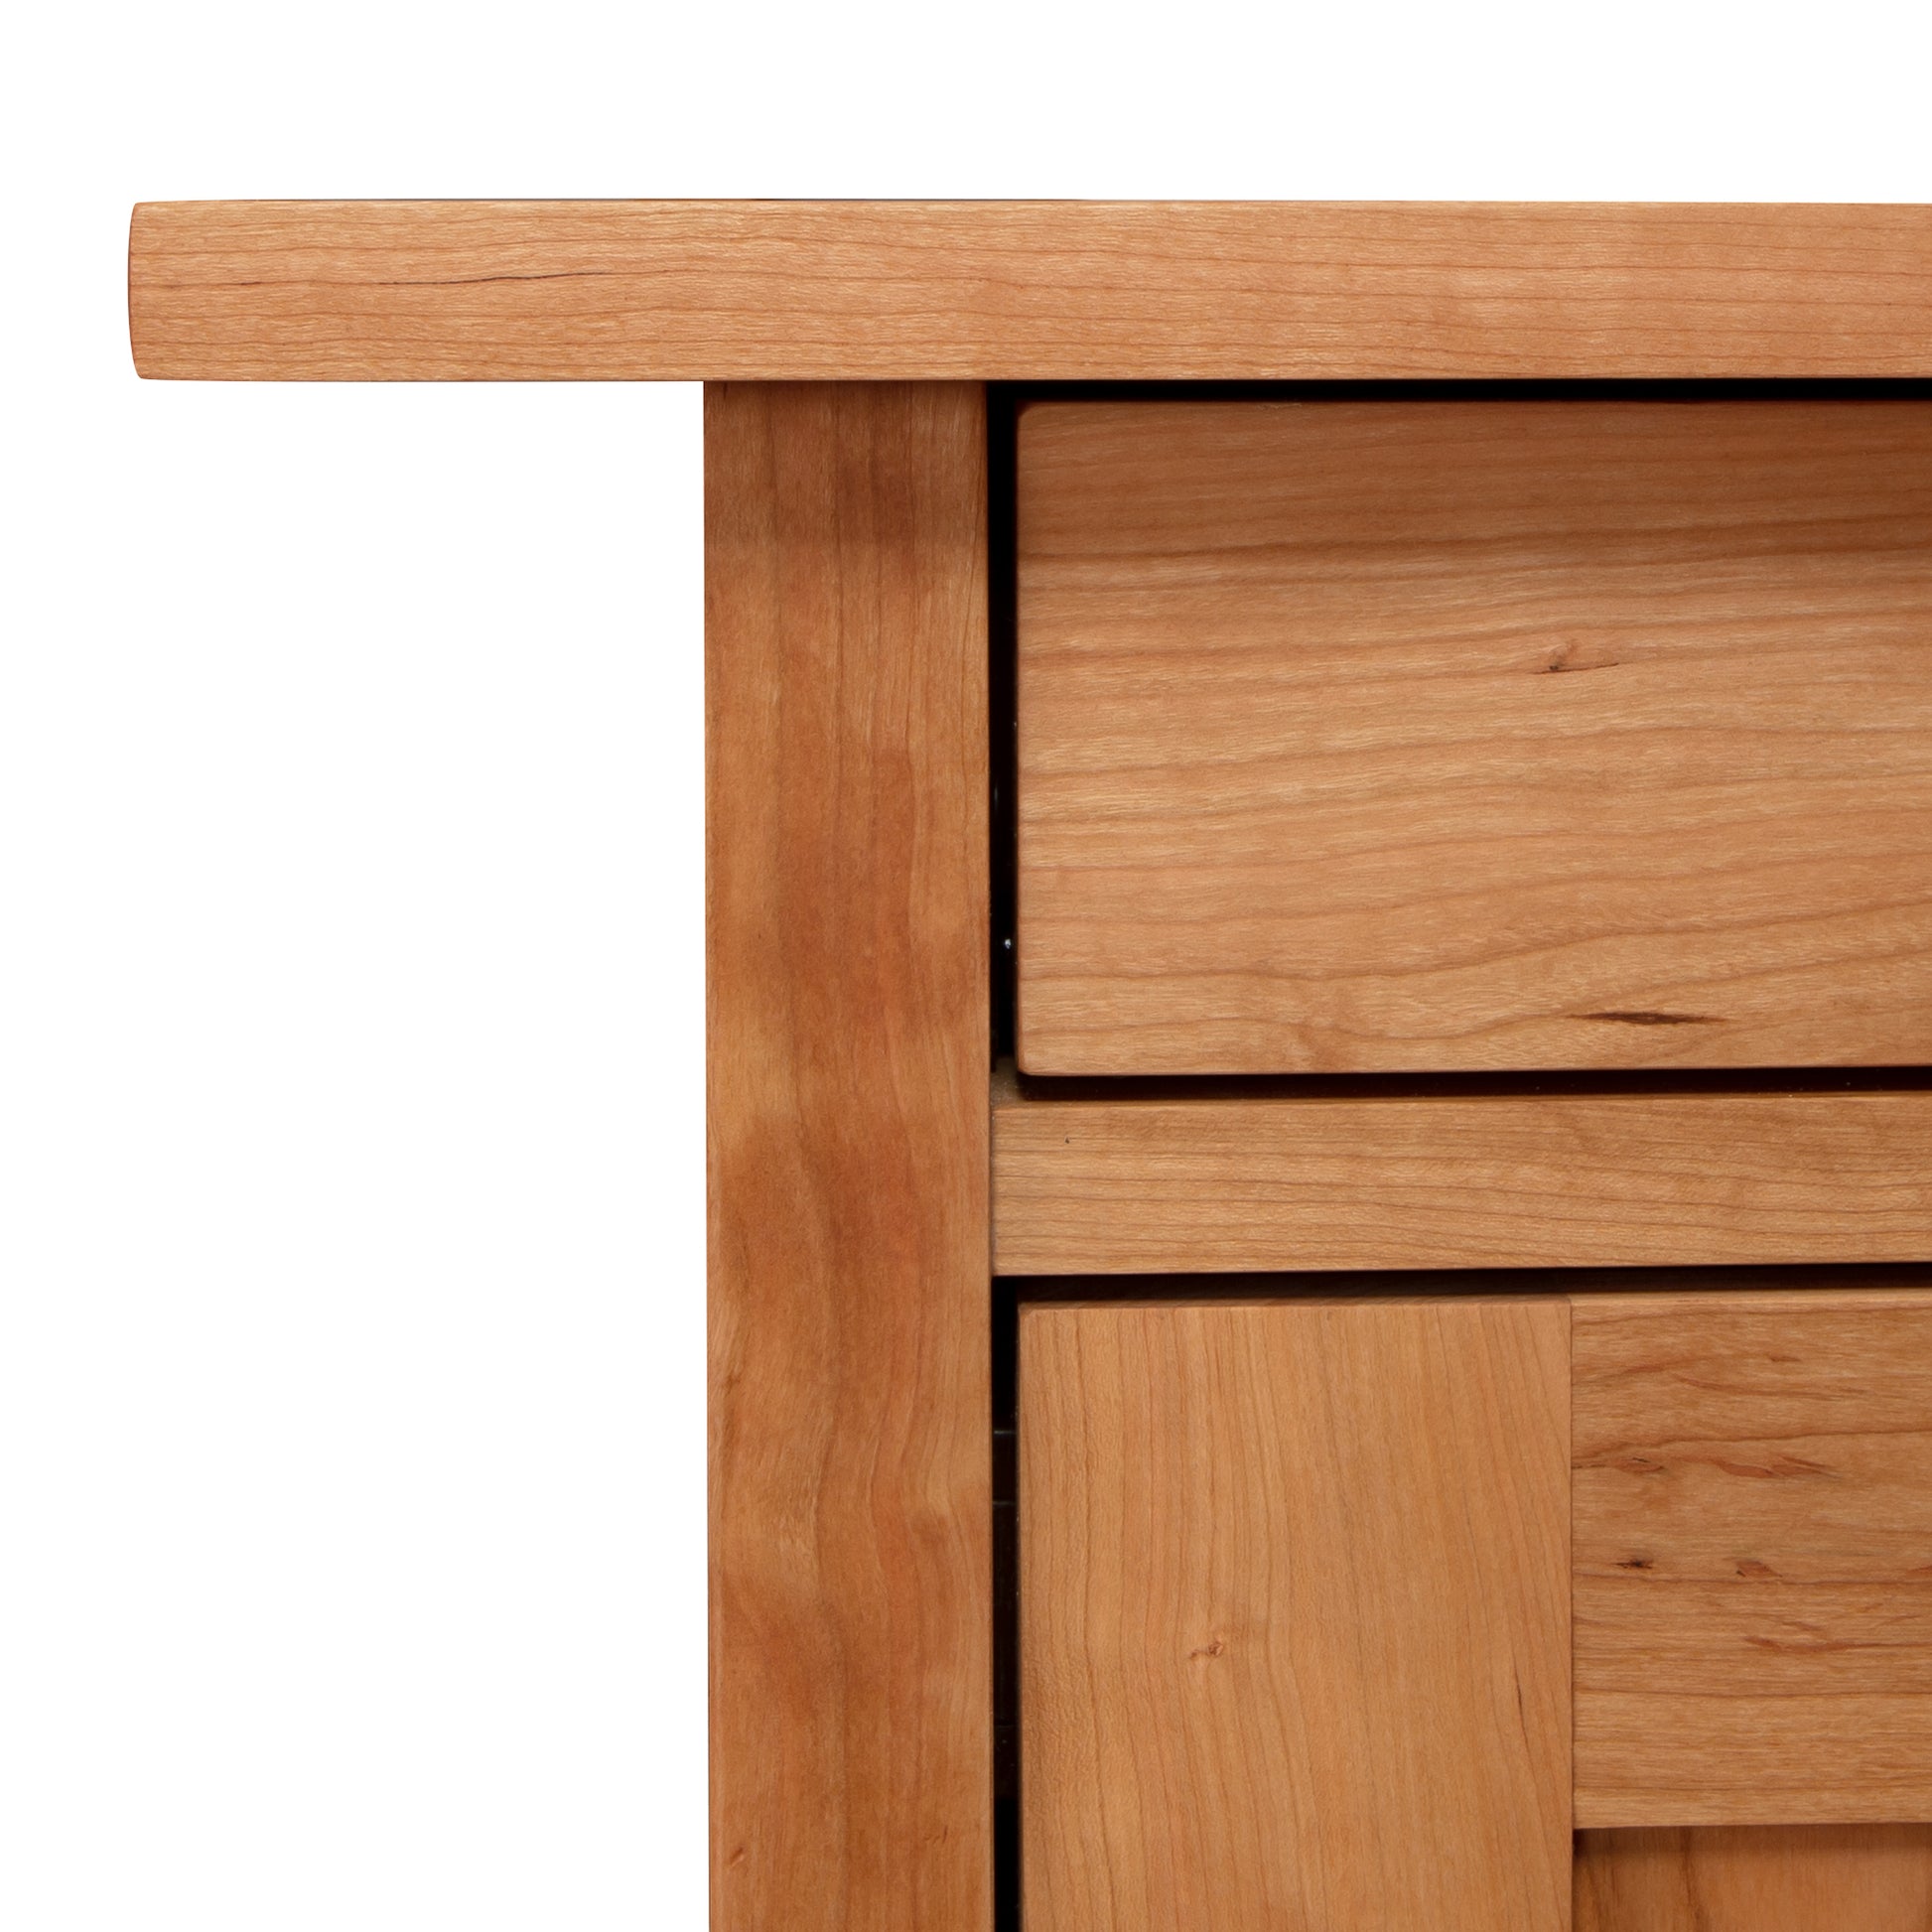 A close up of a wooden cabinet with the Vermont Furniture Designs Modern Craftsman 1-Drawer Nightstand with Door design.